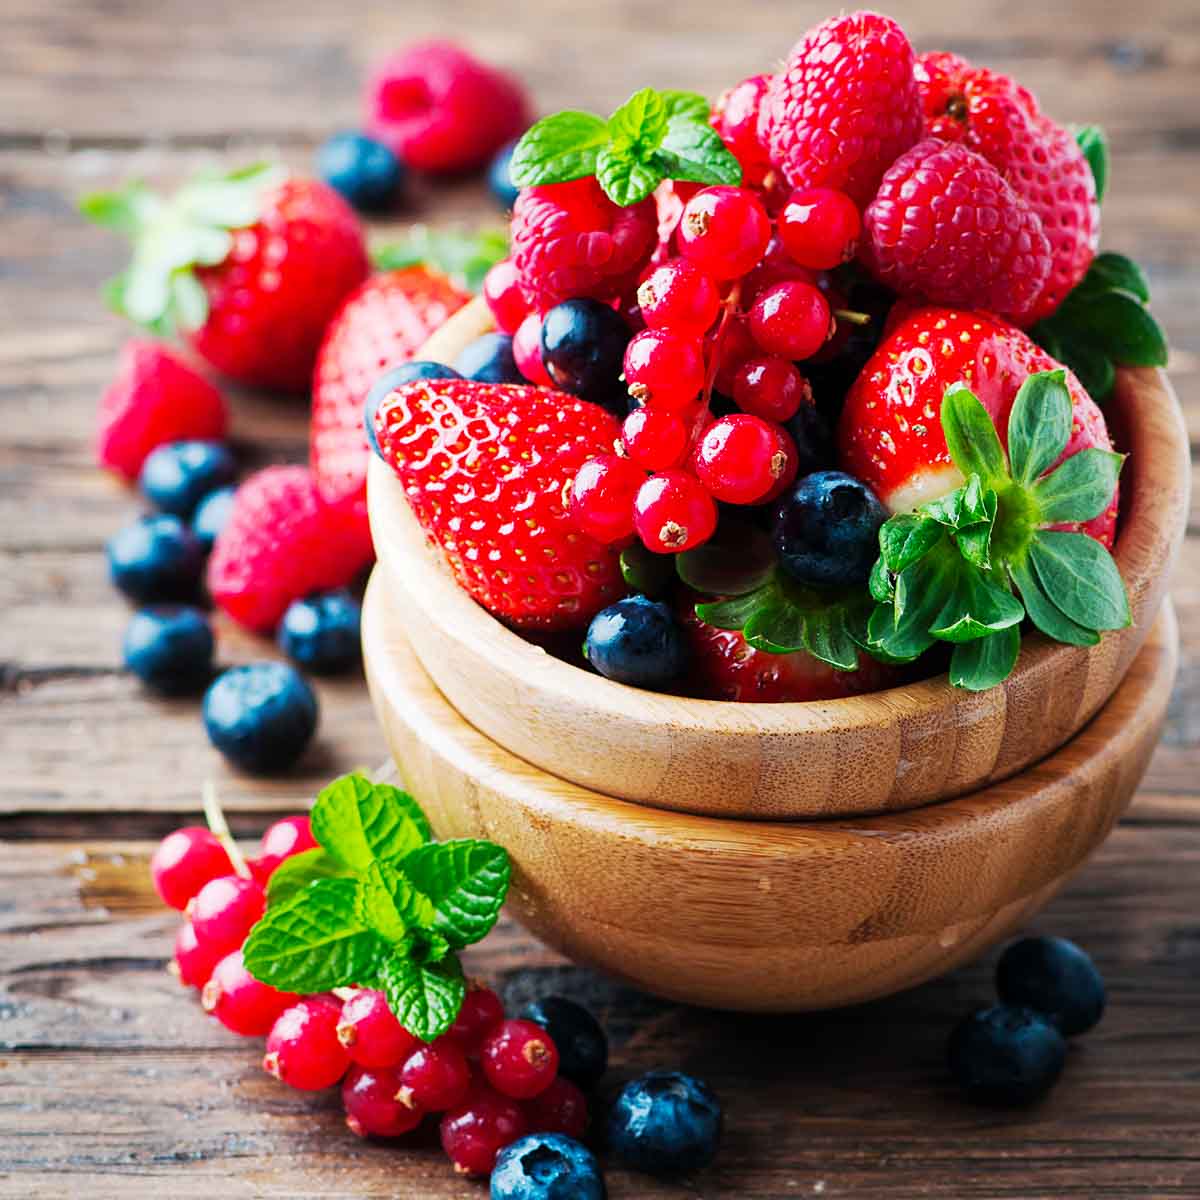 A bowl of mixed fresh berries with mint leaves on a wooden surface.